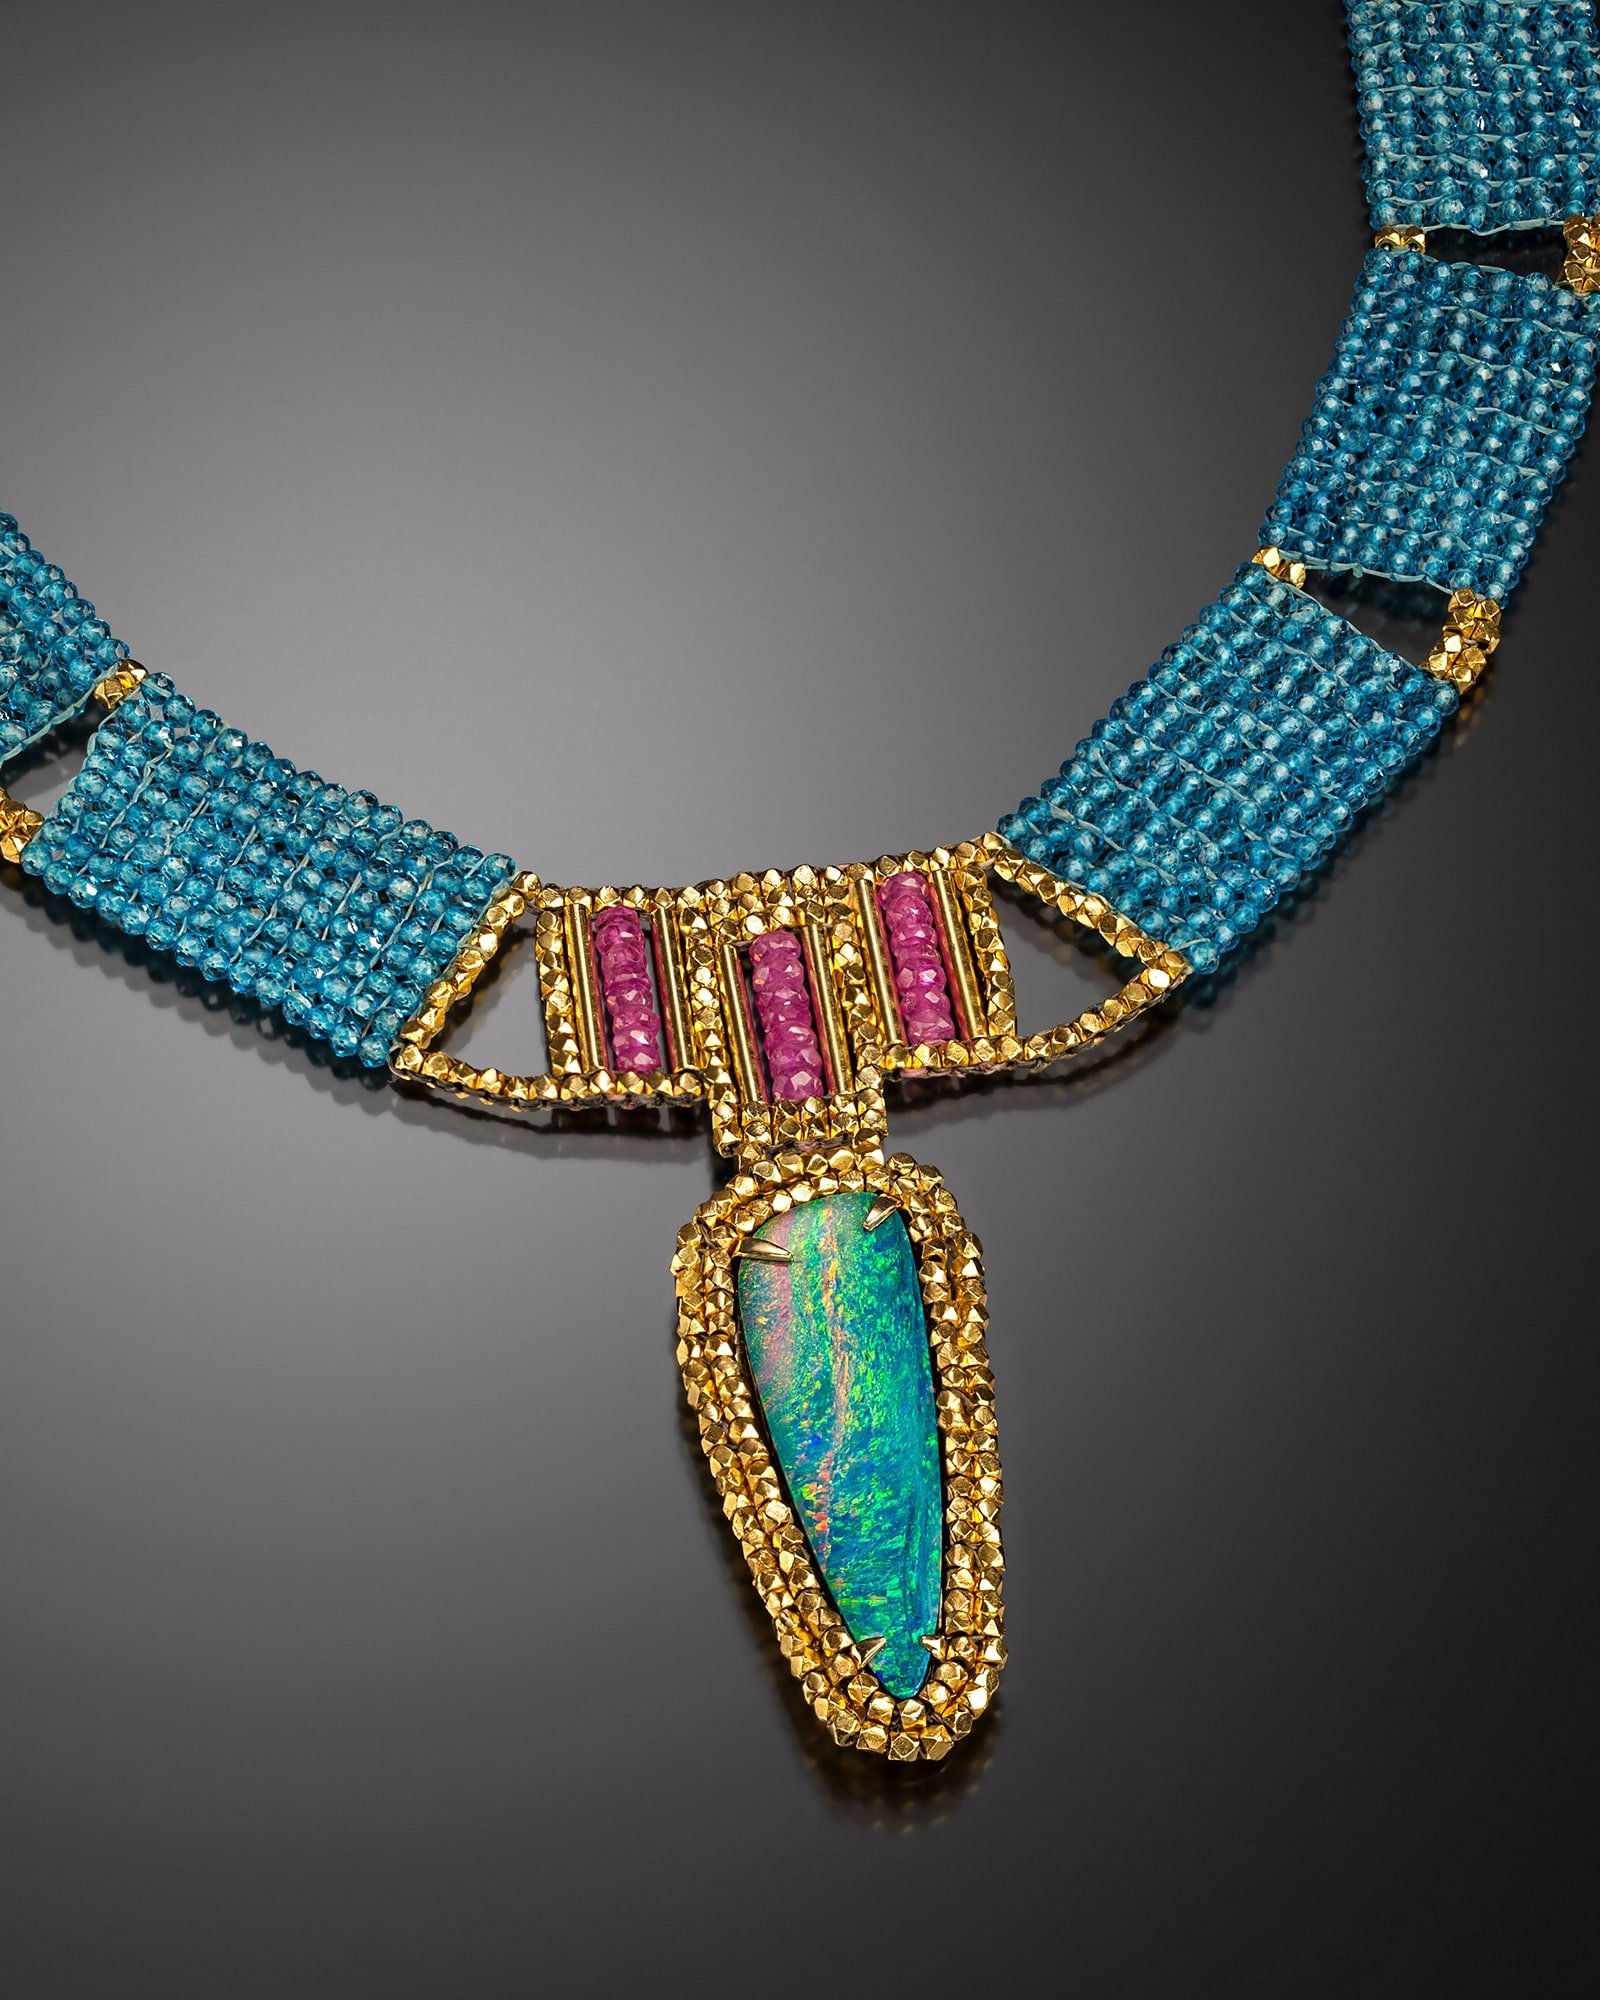 Opal and Pink Sapphire Collar.   Collar is hand woven of blue topaz, pink sapphire, and 18k gold beads; pendant is hand fabricated of 18k gold, set. with an Australian opal.